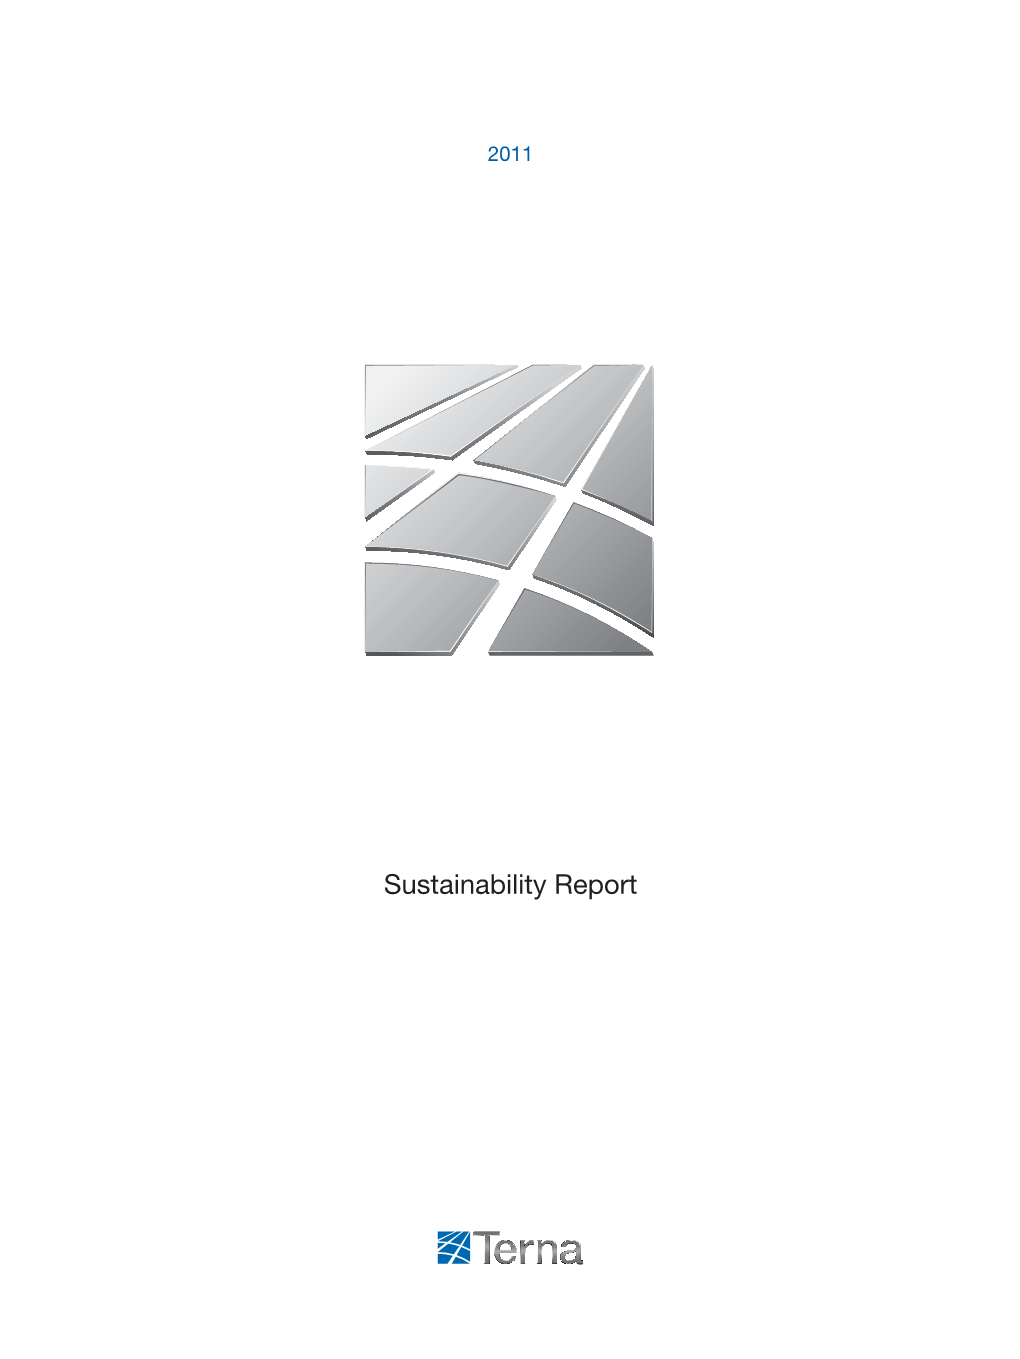 Sustainability Report Terna Is a Leading Grid Operator for Electricity Transmission in Italy and Guarantees Its Safety, Quality and Cost-Effectiveness Over Time